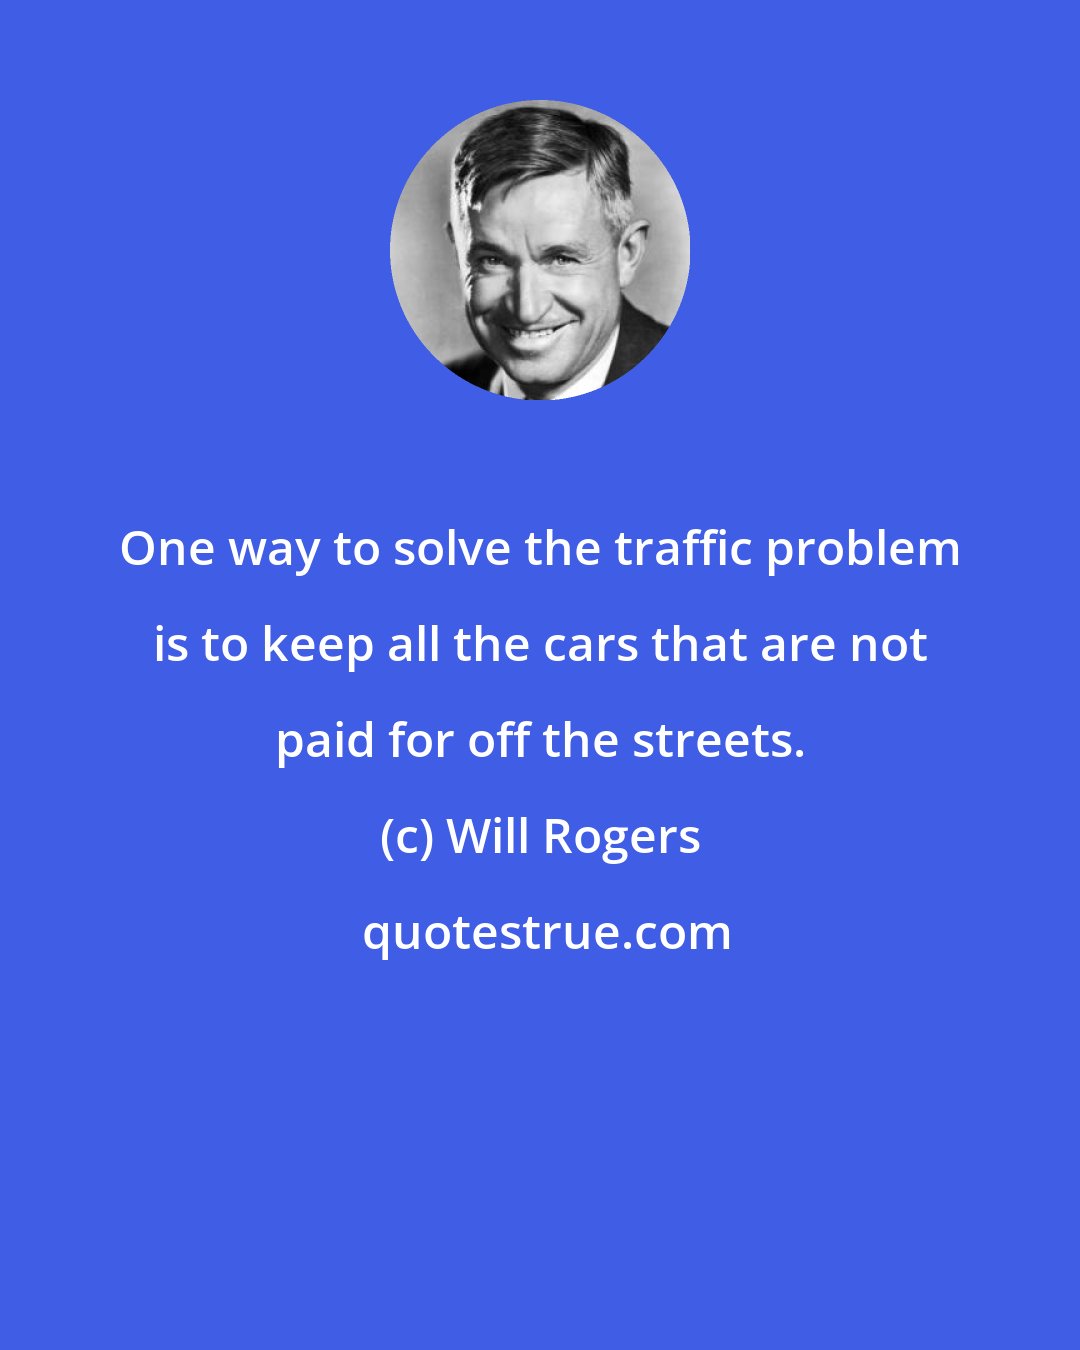 Will Rogers: One way to solve the traffic problem is to keep all the cars that are not paid for off the streets.